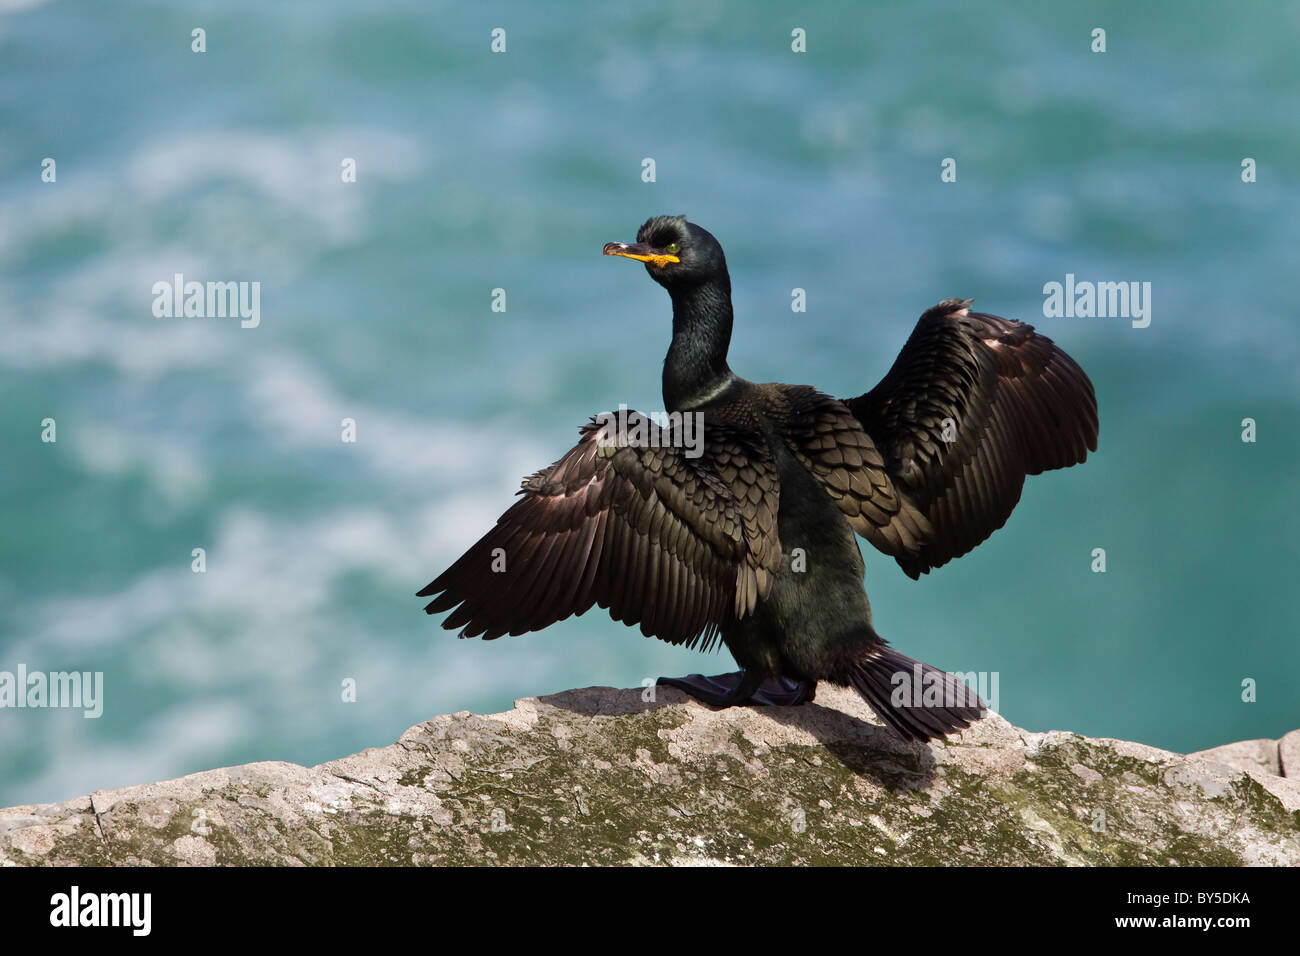 Shag with wings widespread on a cliff overlooking a turquoise  sea Stock Photo